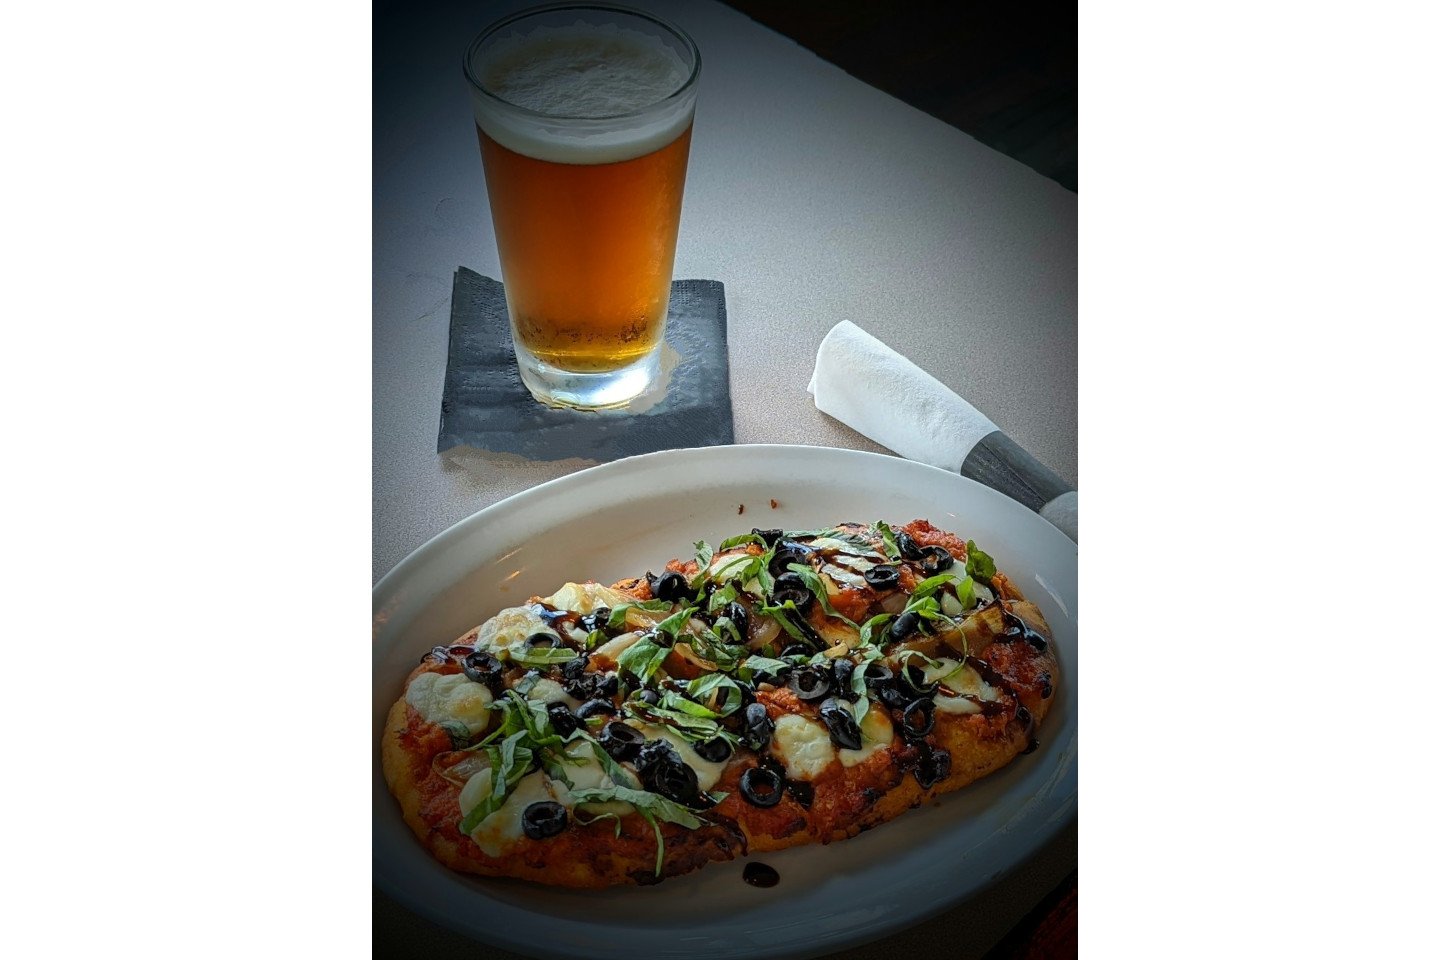 Pizza and Draft Beer at Blue Heron Restaurant